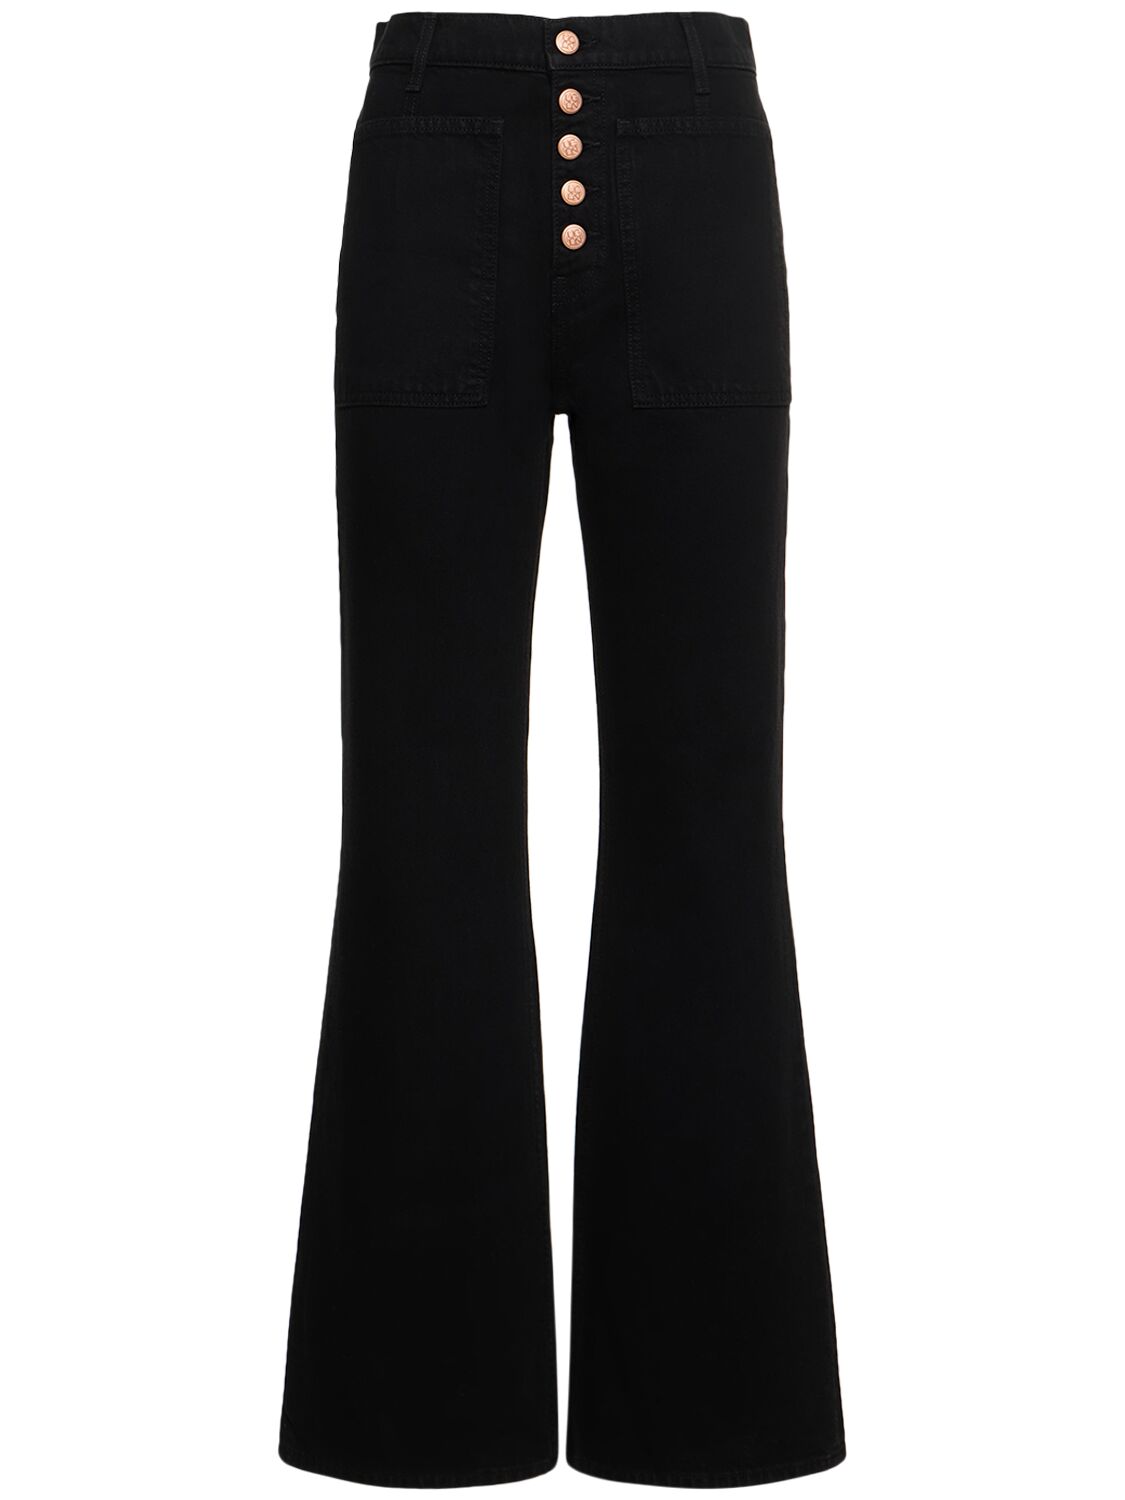 ULLA JOHNSON THE LOU HIGH RISE FLARED JEANS